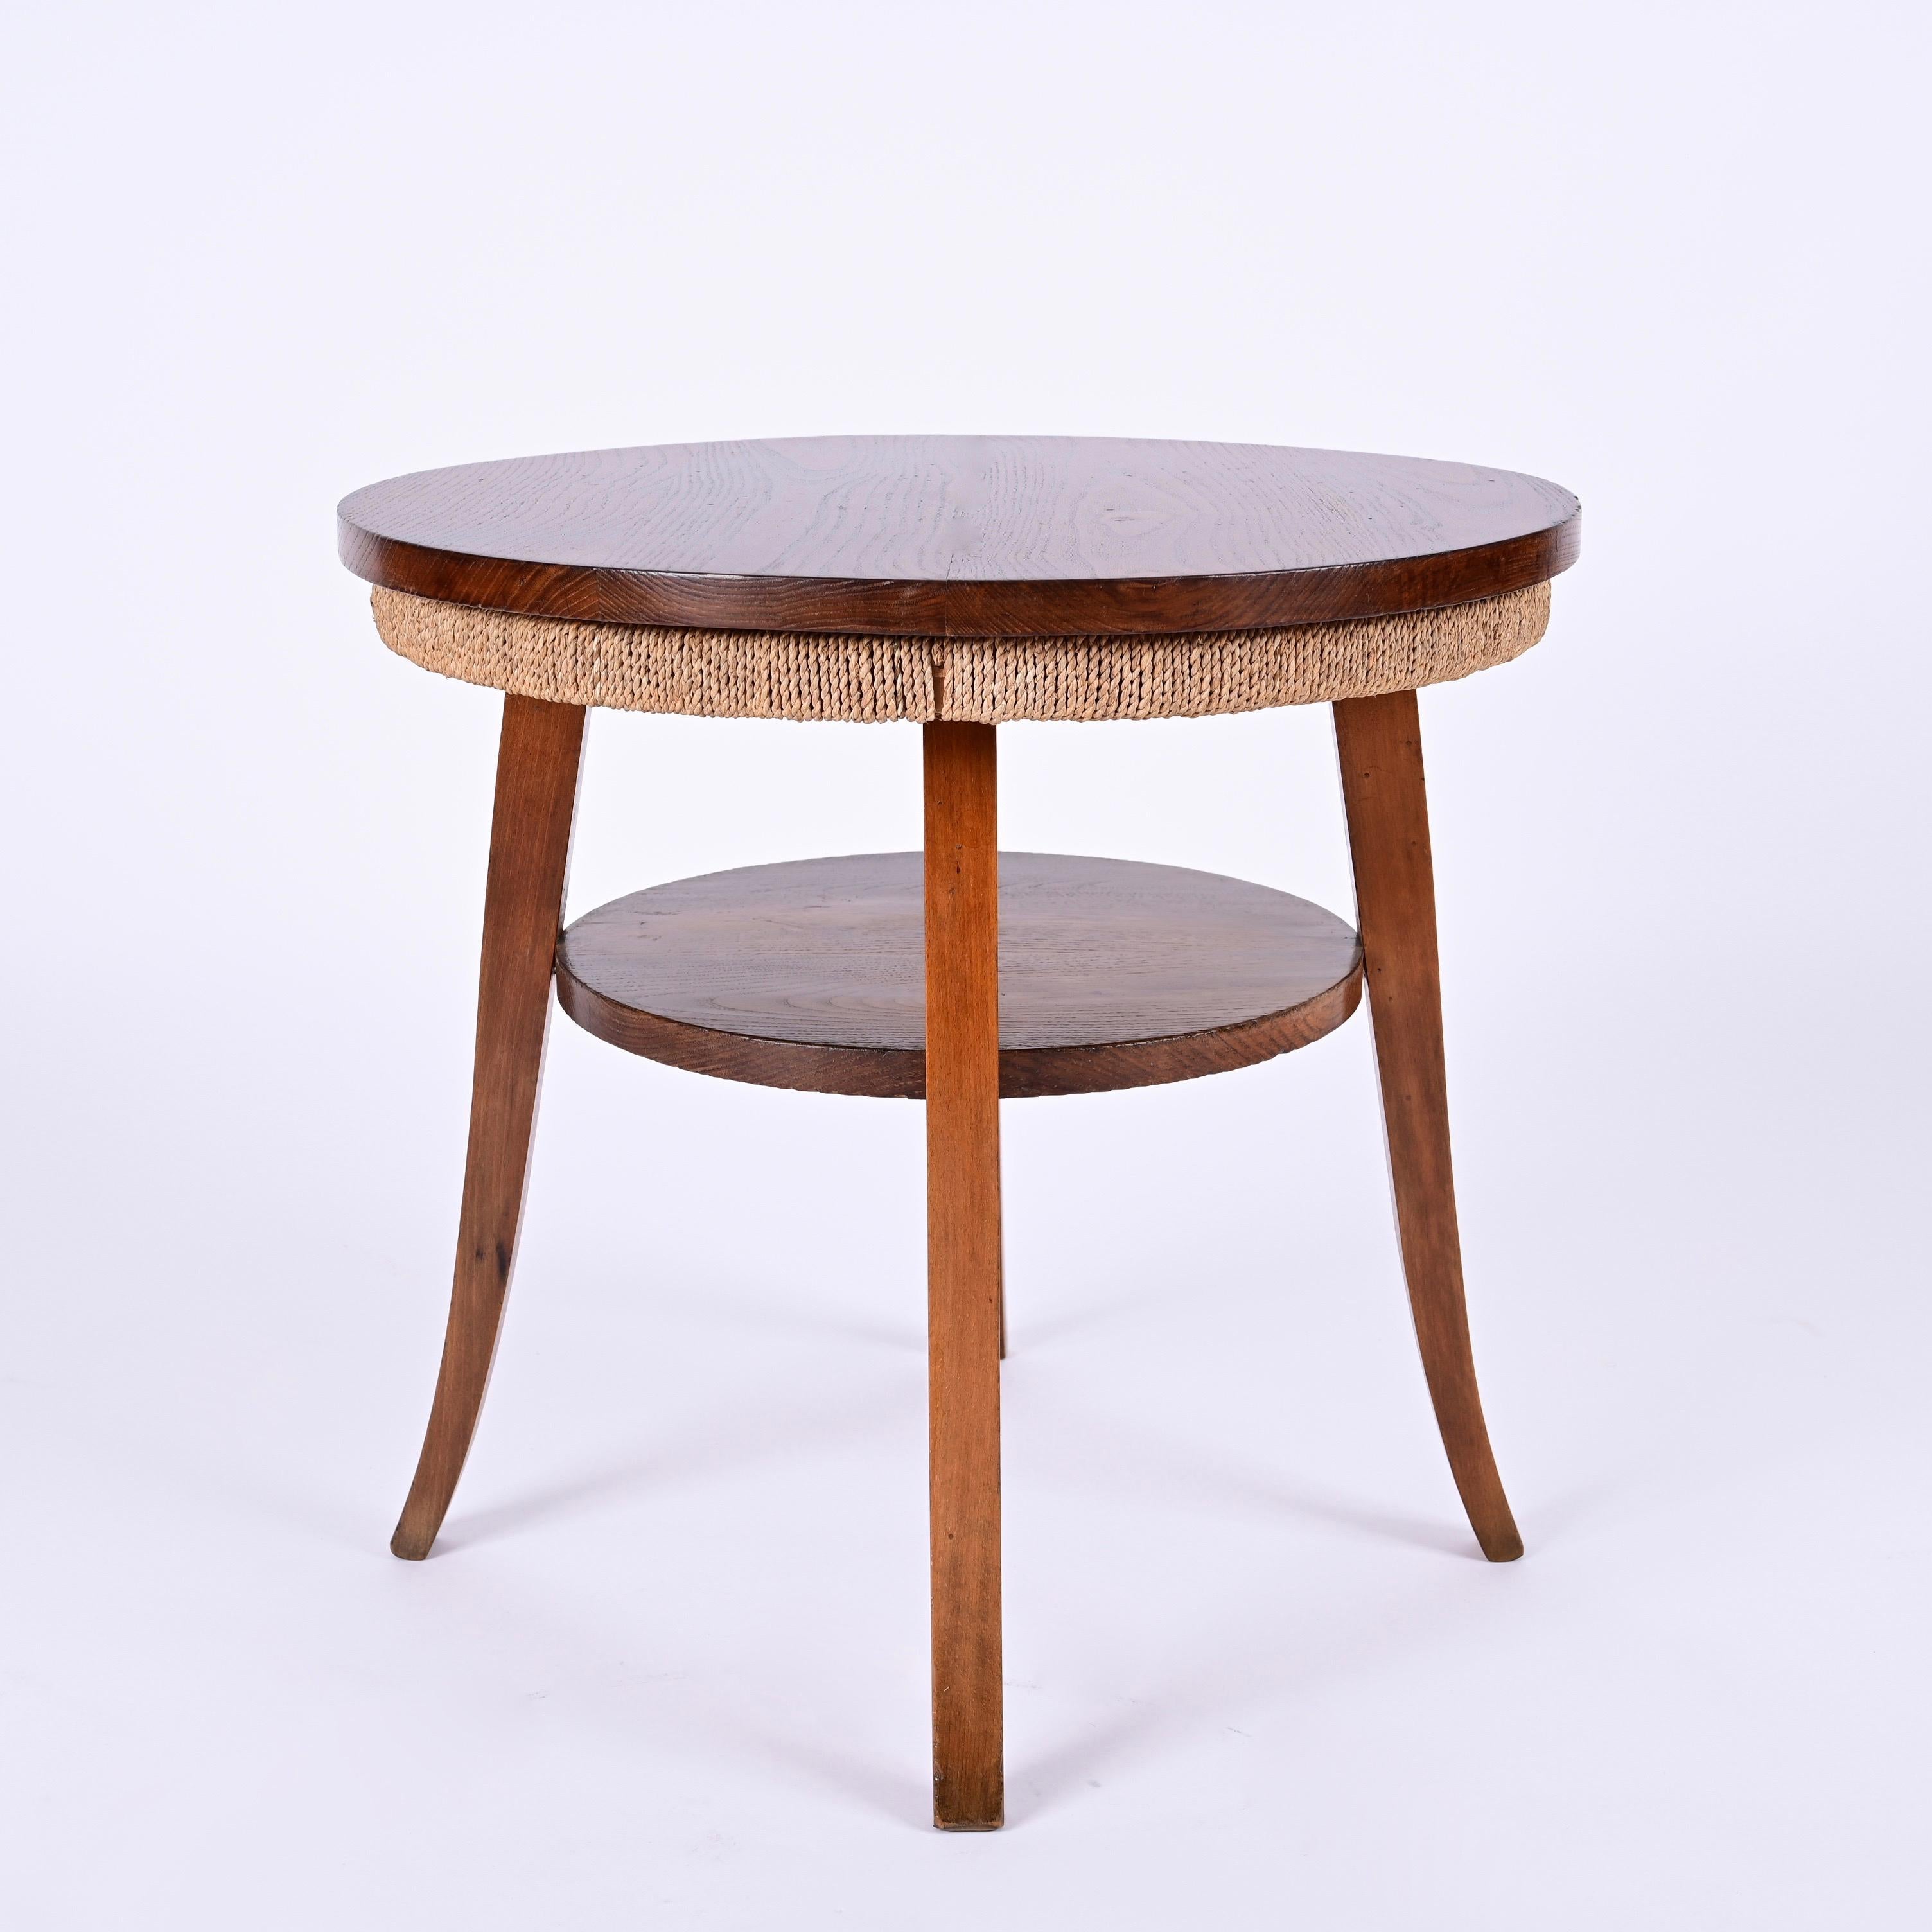 Midcentury Two-Tier Round Rope and Chestnut Wood Italian Coffee Table, 1950s For Sale 4